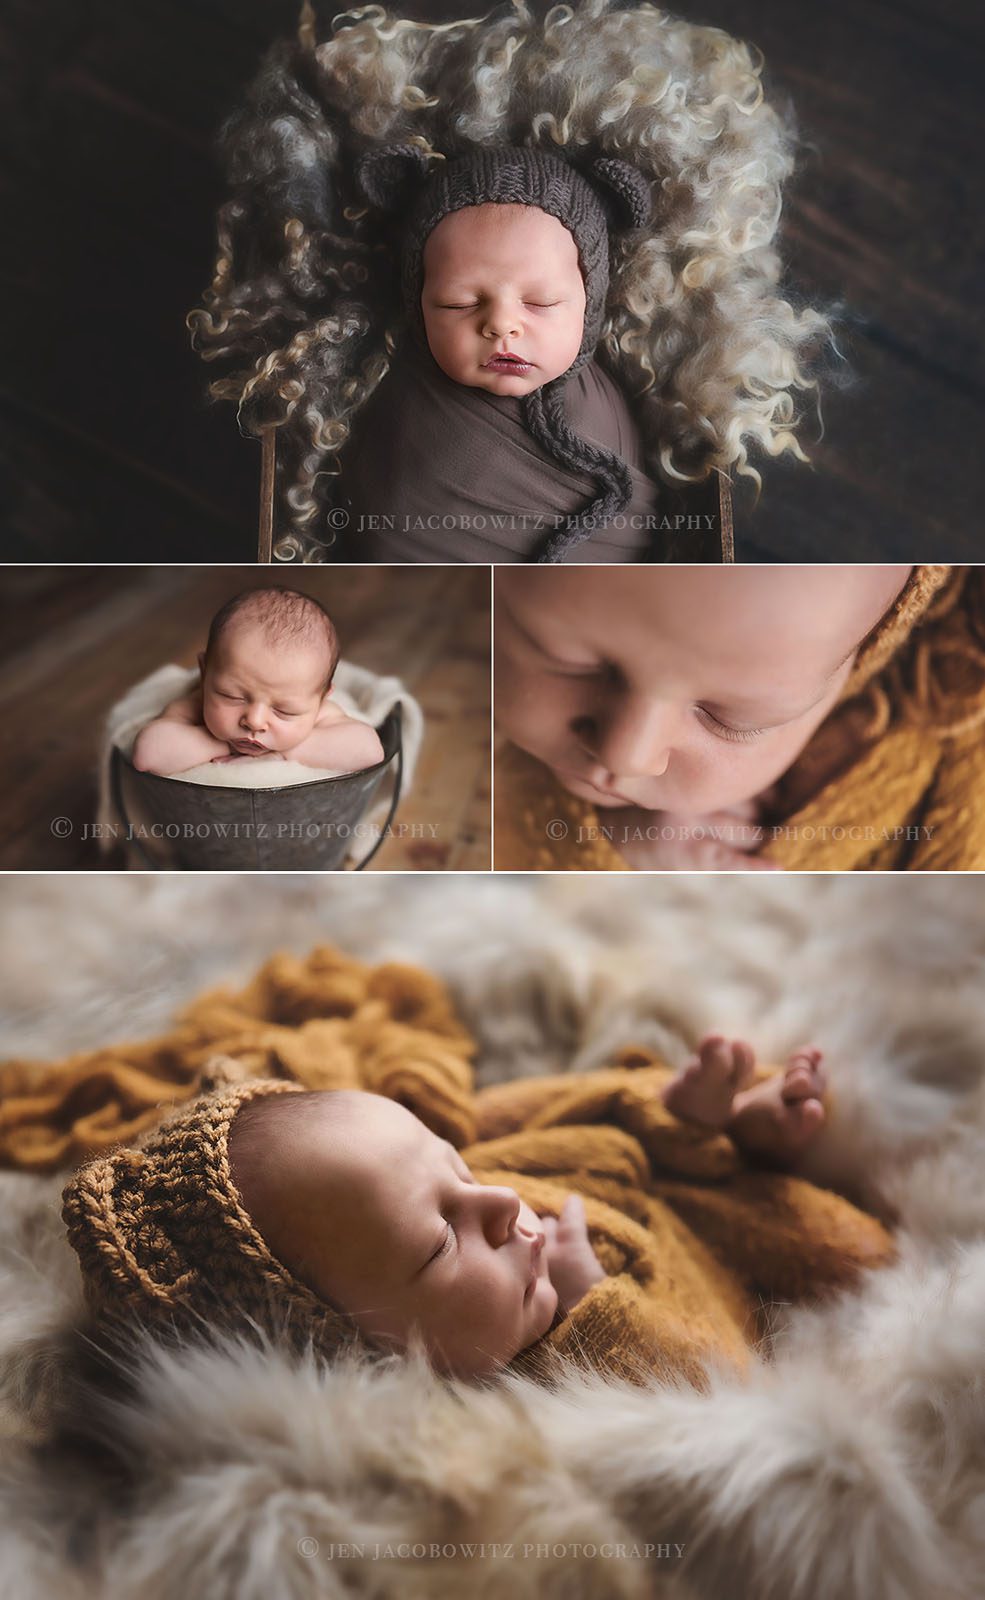 Newborn Photography collections